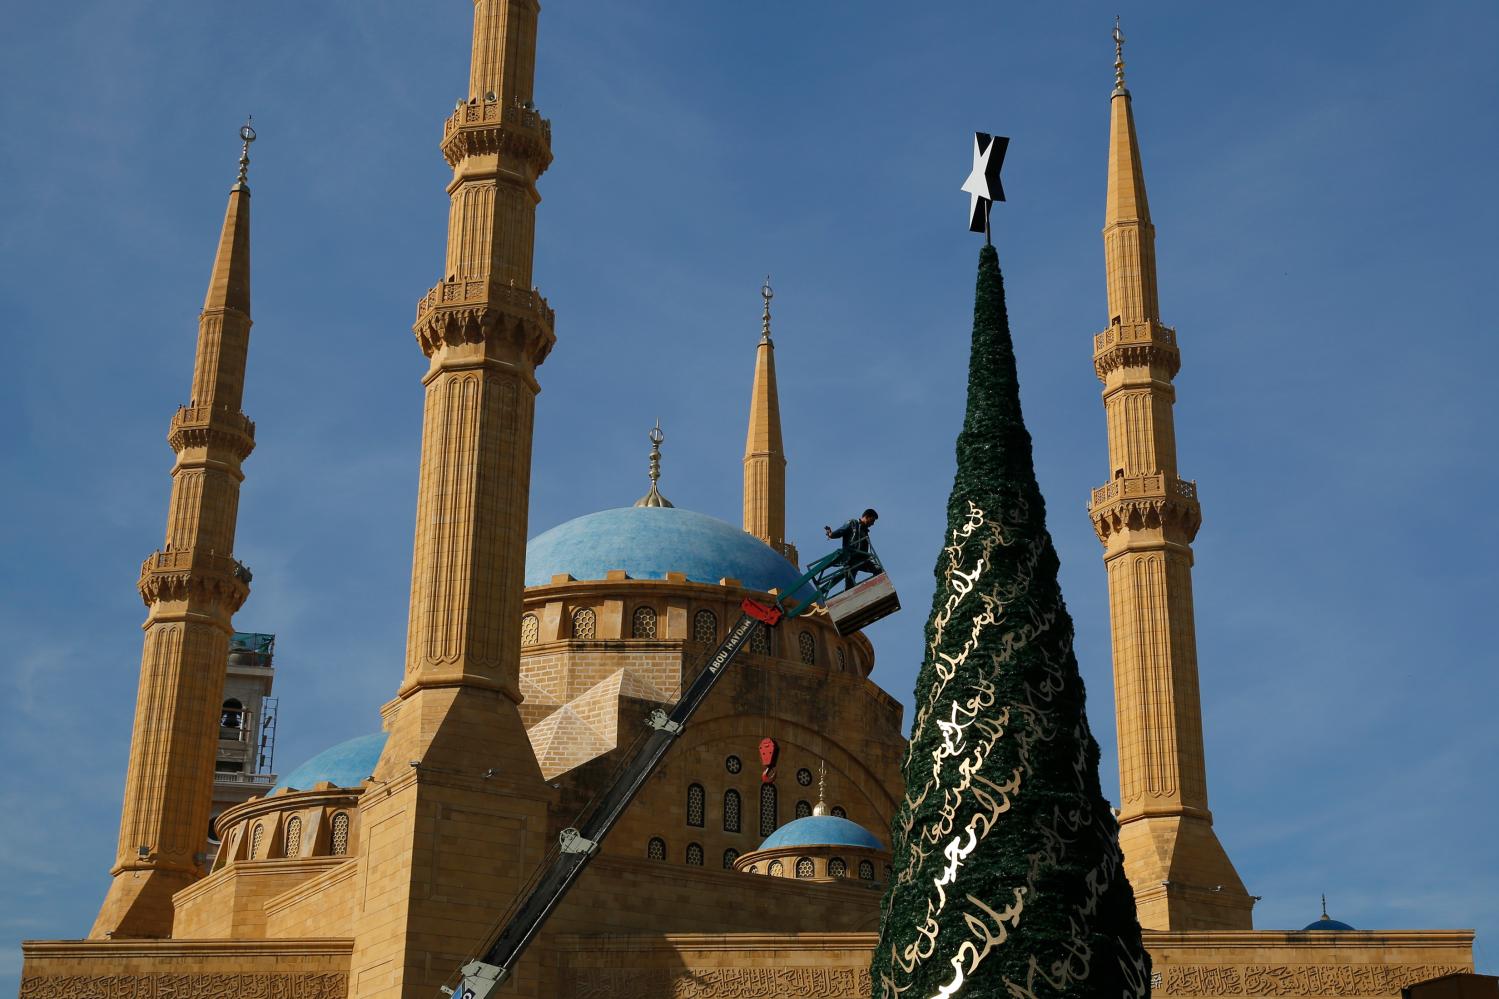 A worker decorates a Christmas tree designed by Lebanese designer Elie Saab in front of the Al-Amin mosque in Beirut, Lebanon, December 9, 2015. Picture taken December 9, 2015. REUTERS/Jamal Saidi - RTX1Y14M